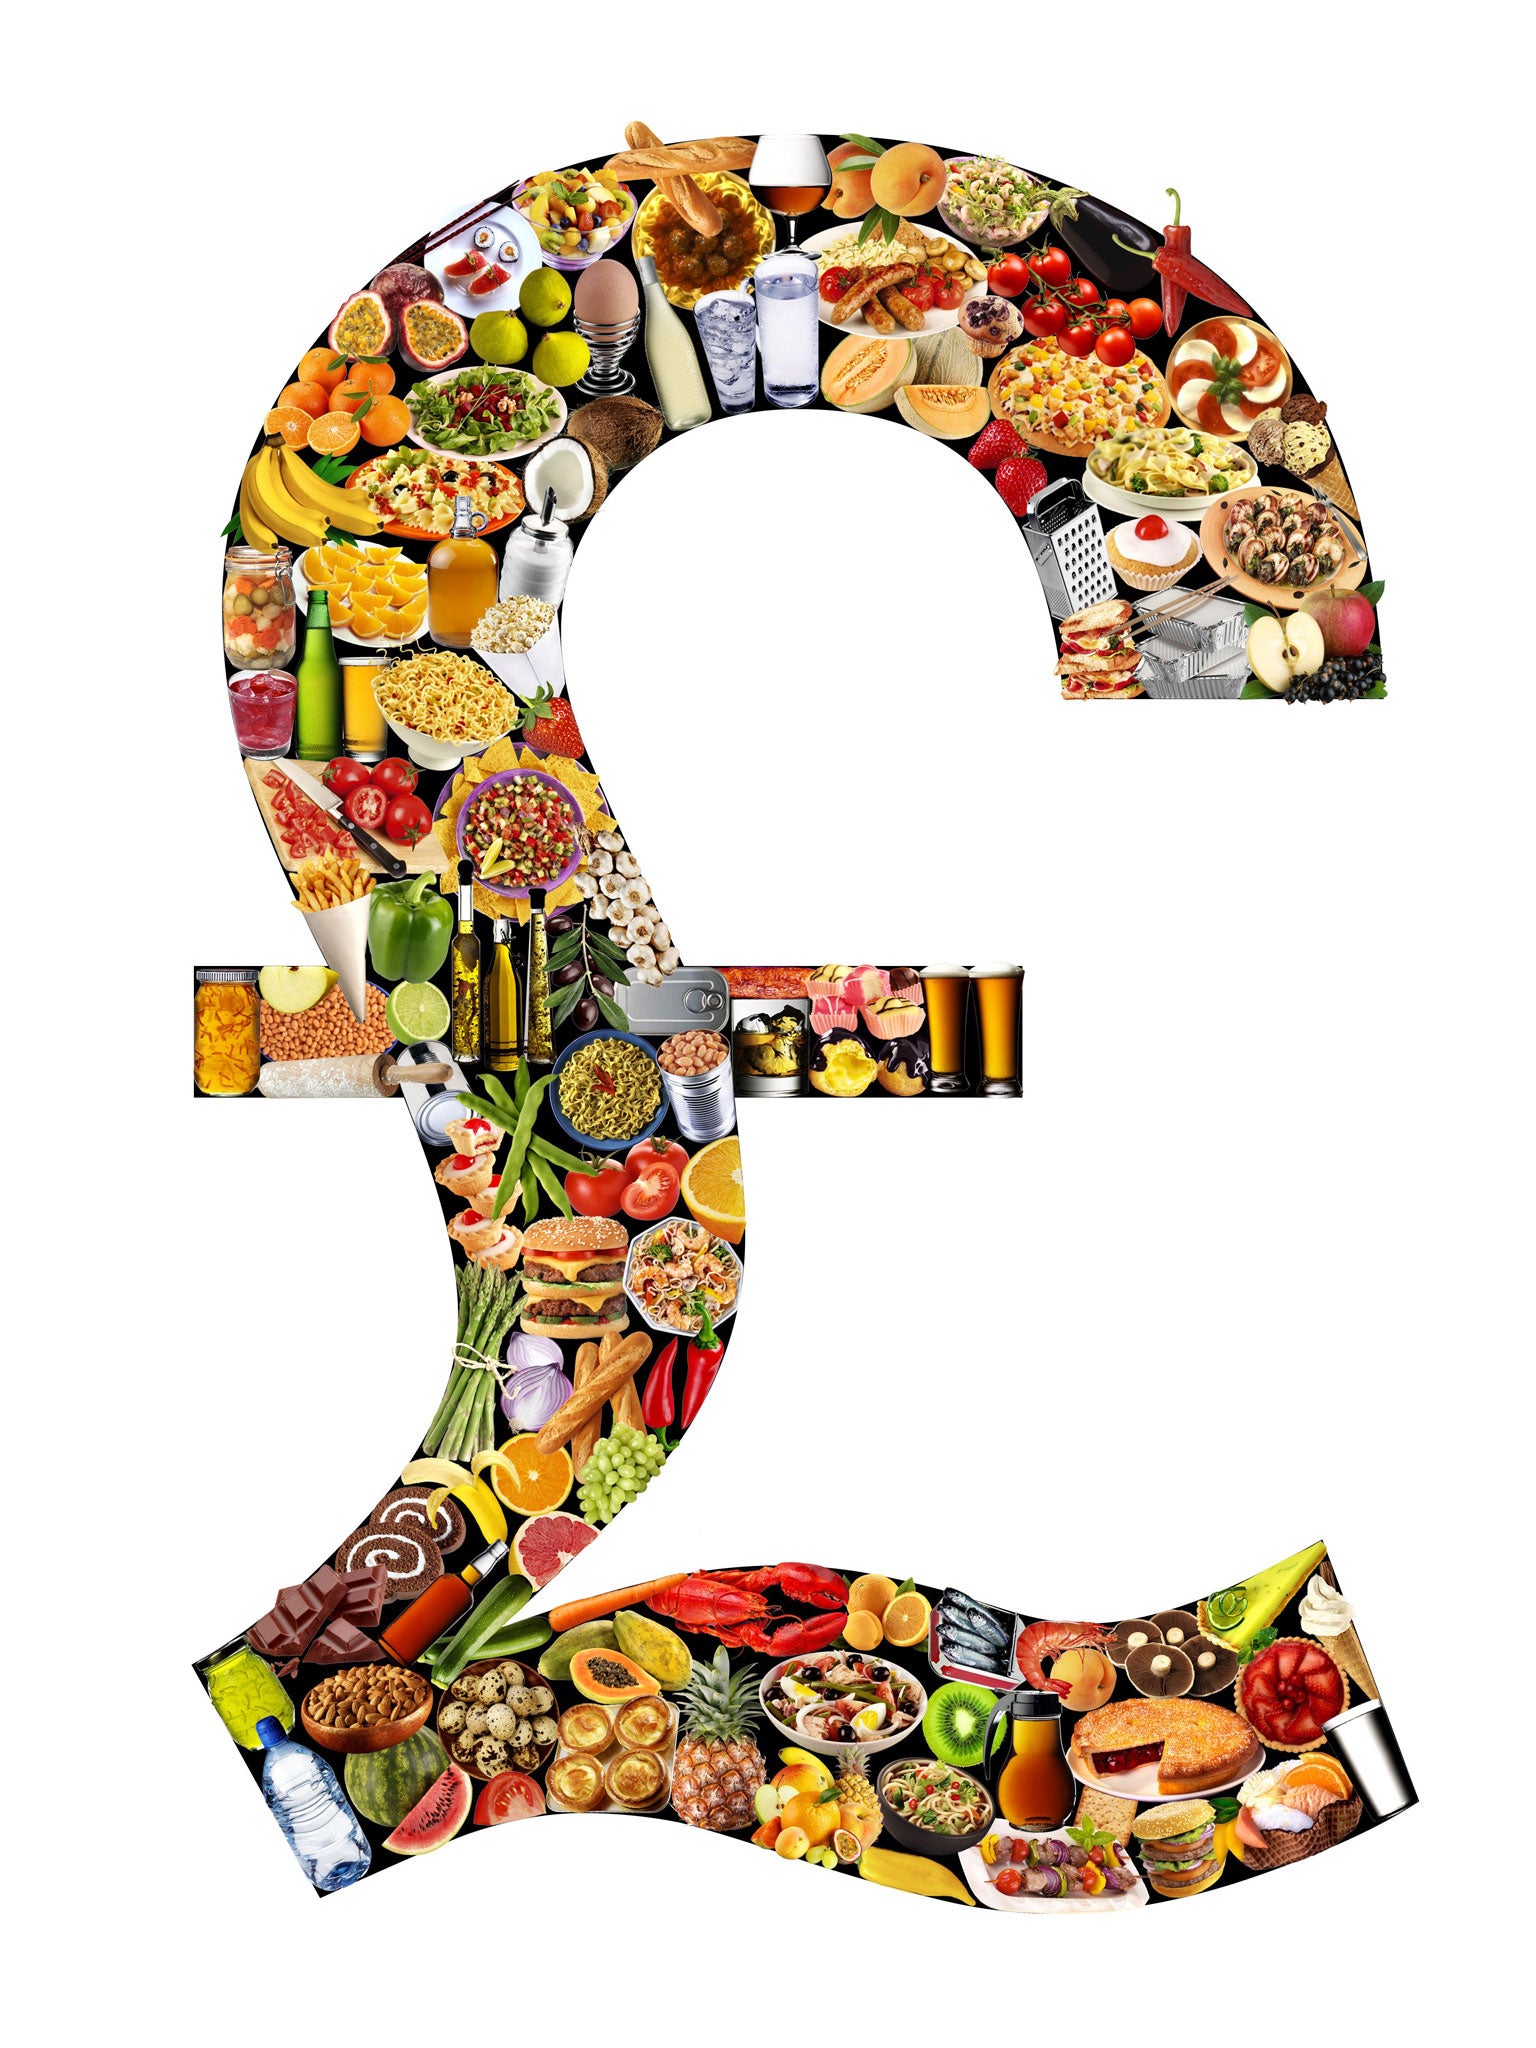 The big four supermarkets have all revealed big price-cutting measures in recent months